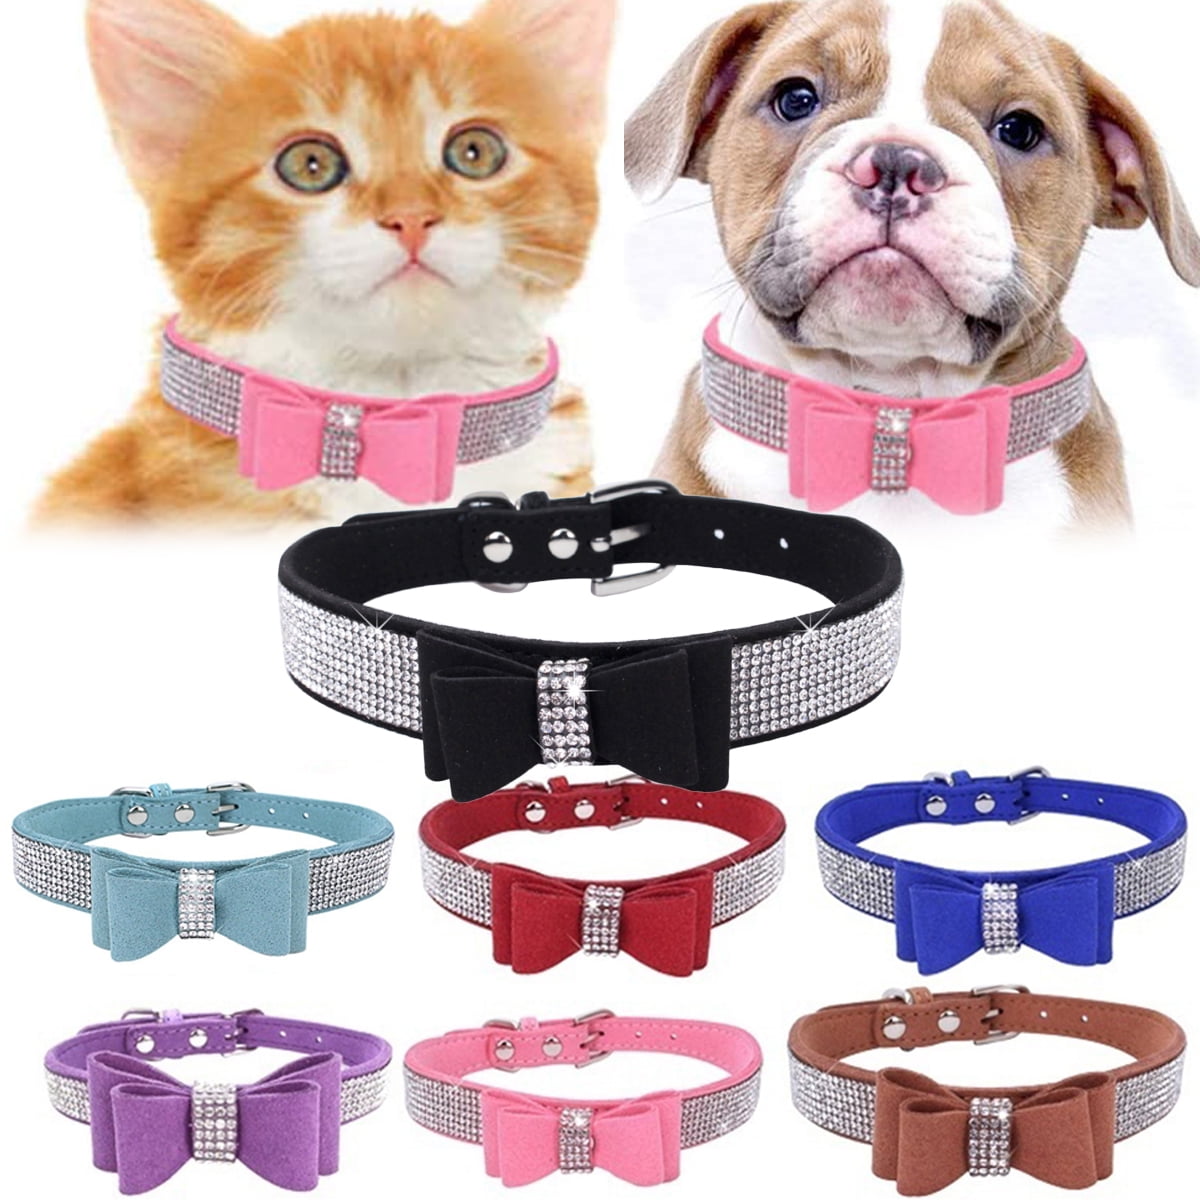 1 Piece Fashion Shiny Pet Neck Collar PU Leather Suede Microfibre for Dog Cat